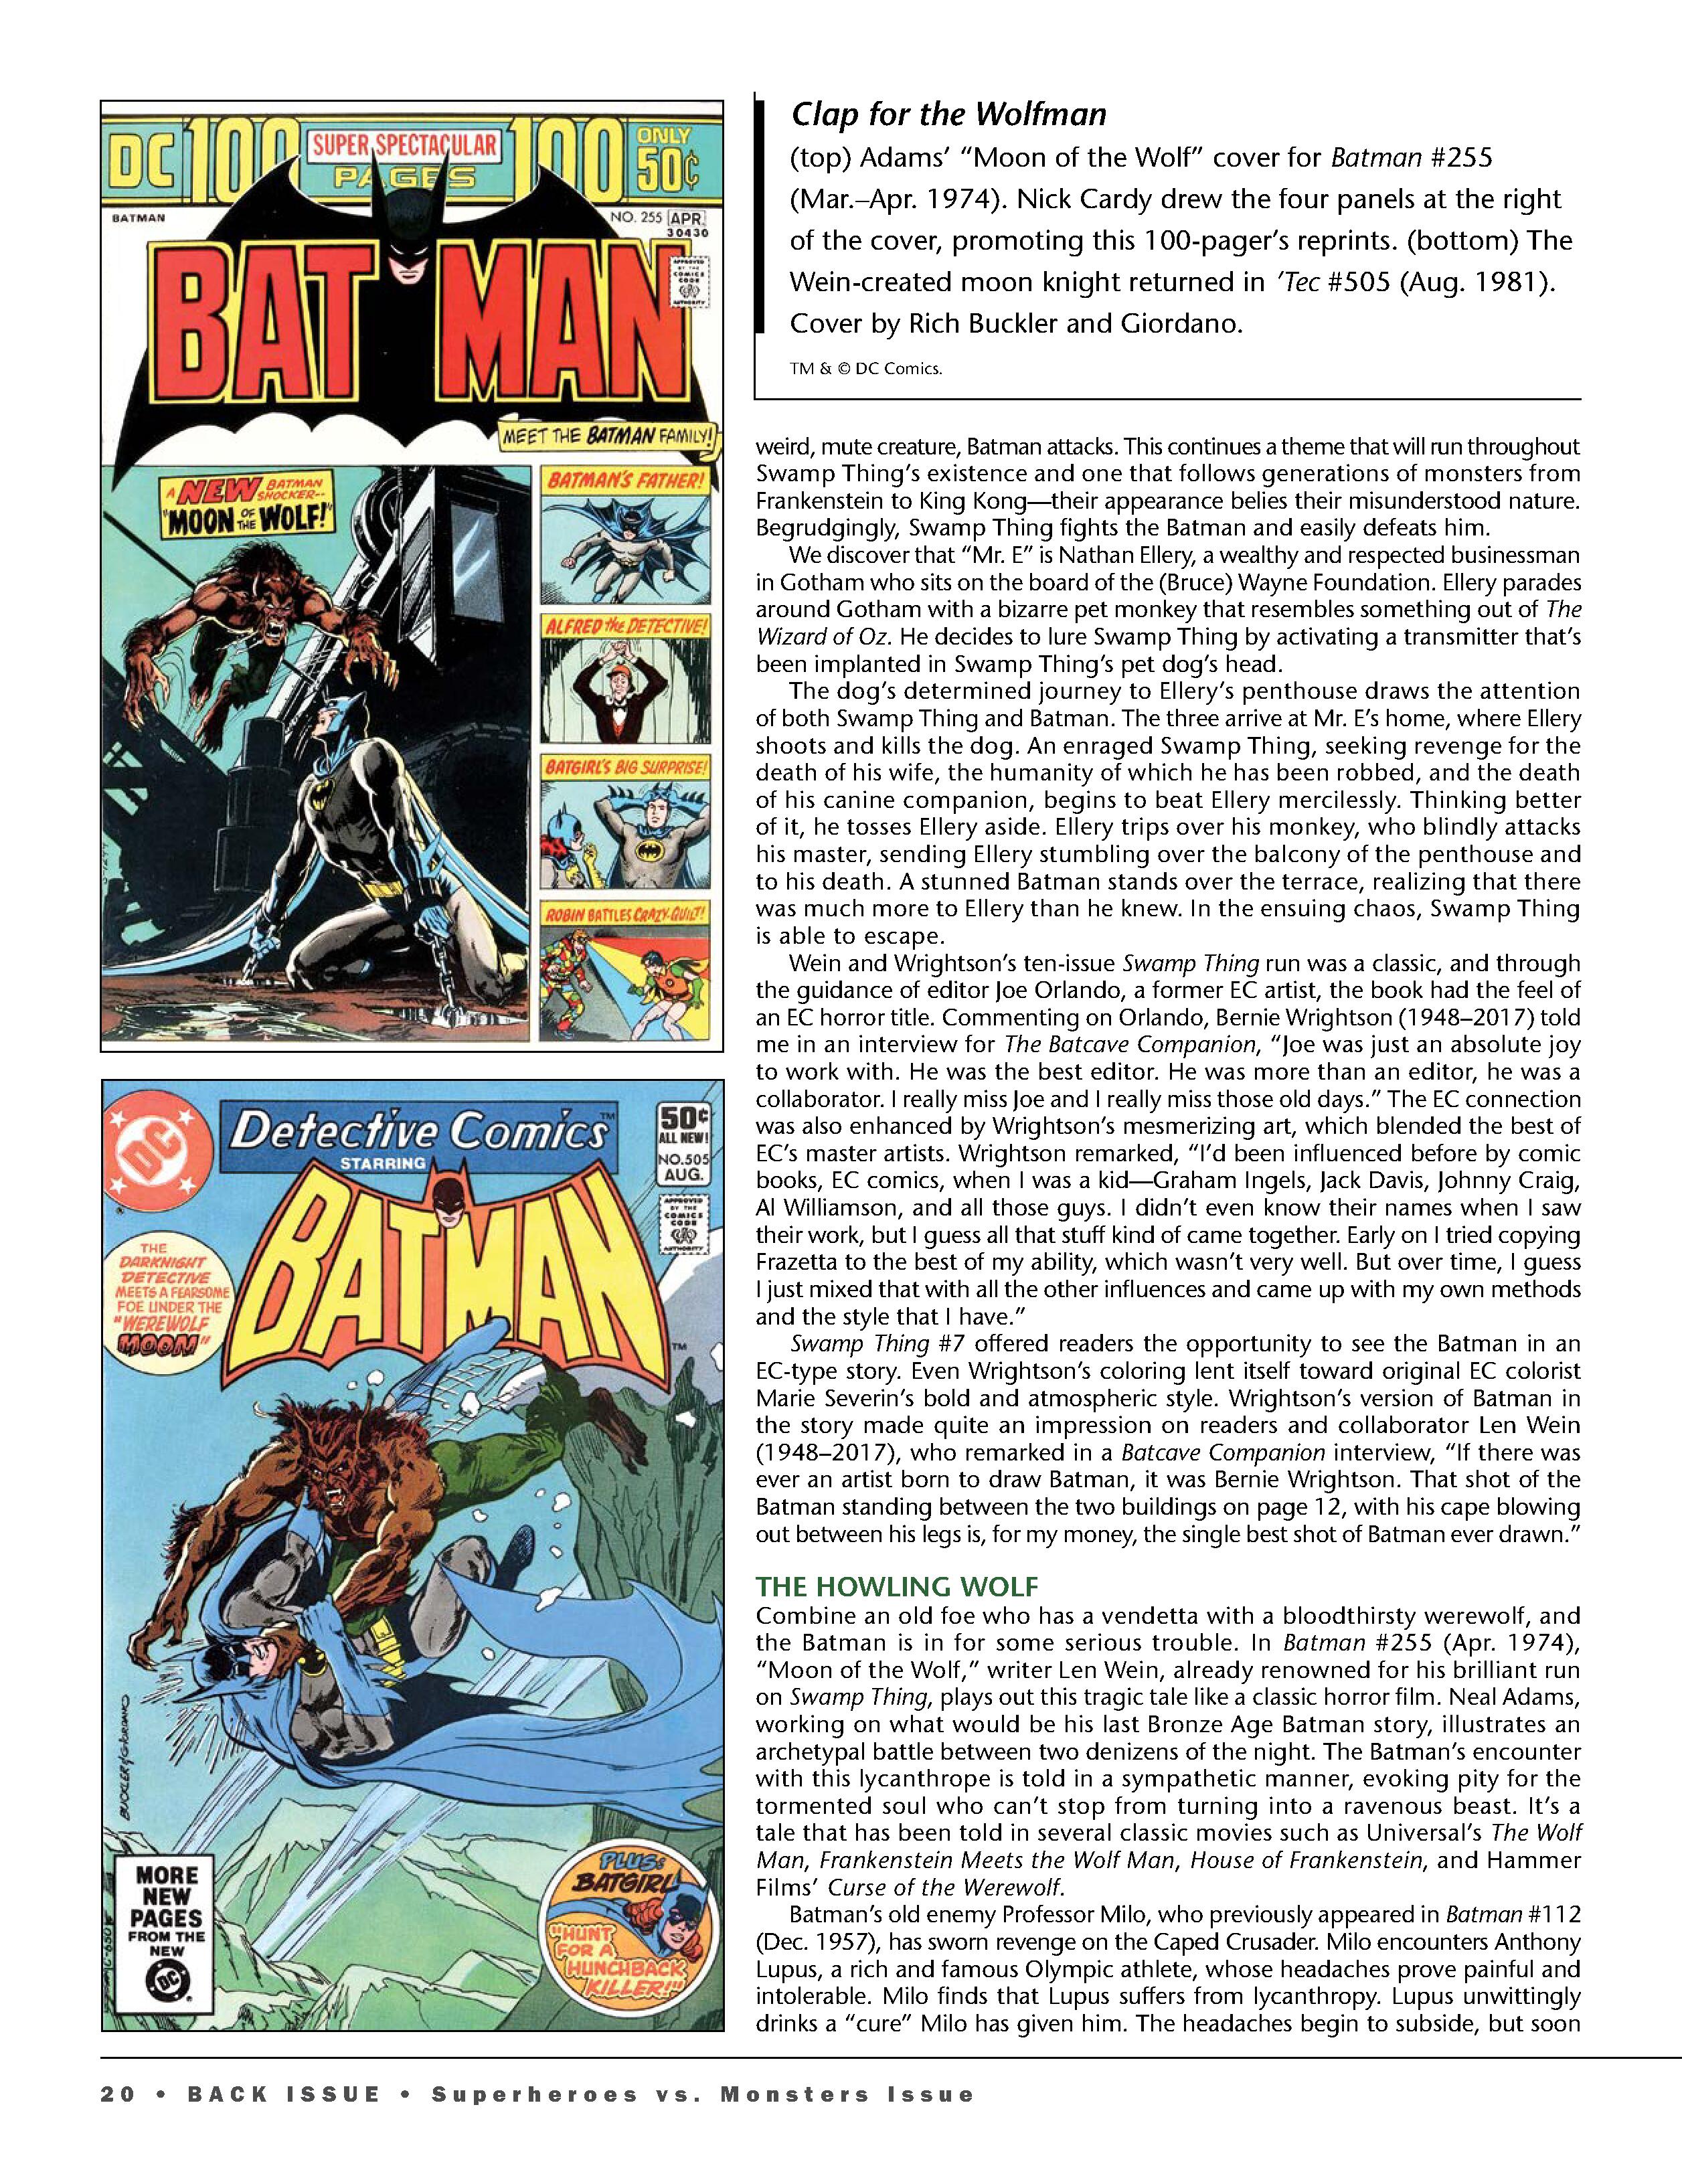 Read online Back Issue comic -  Issue #116 - 22